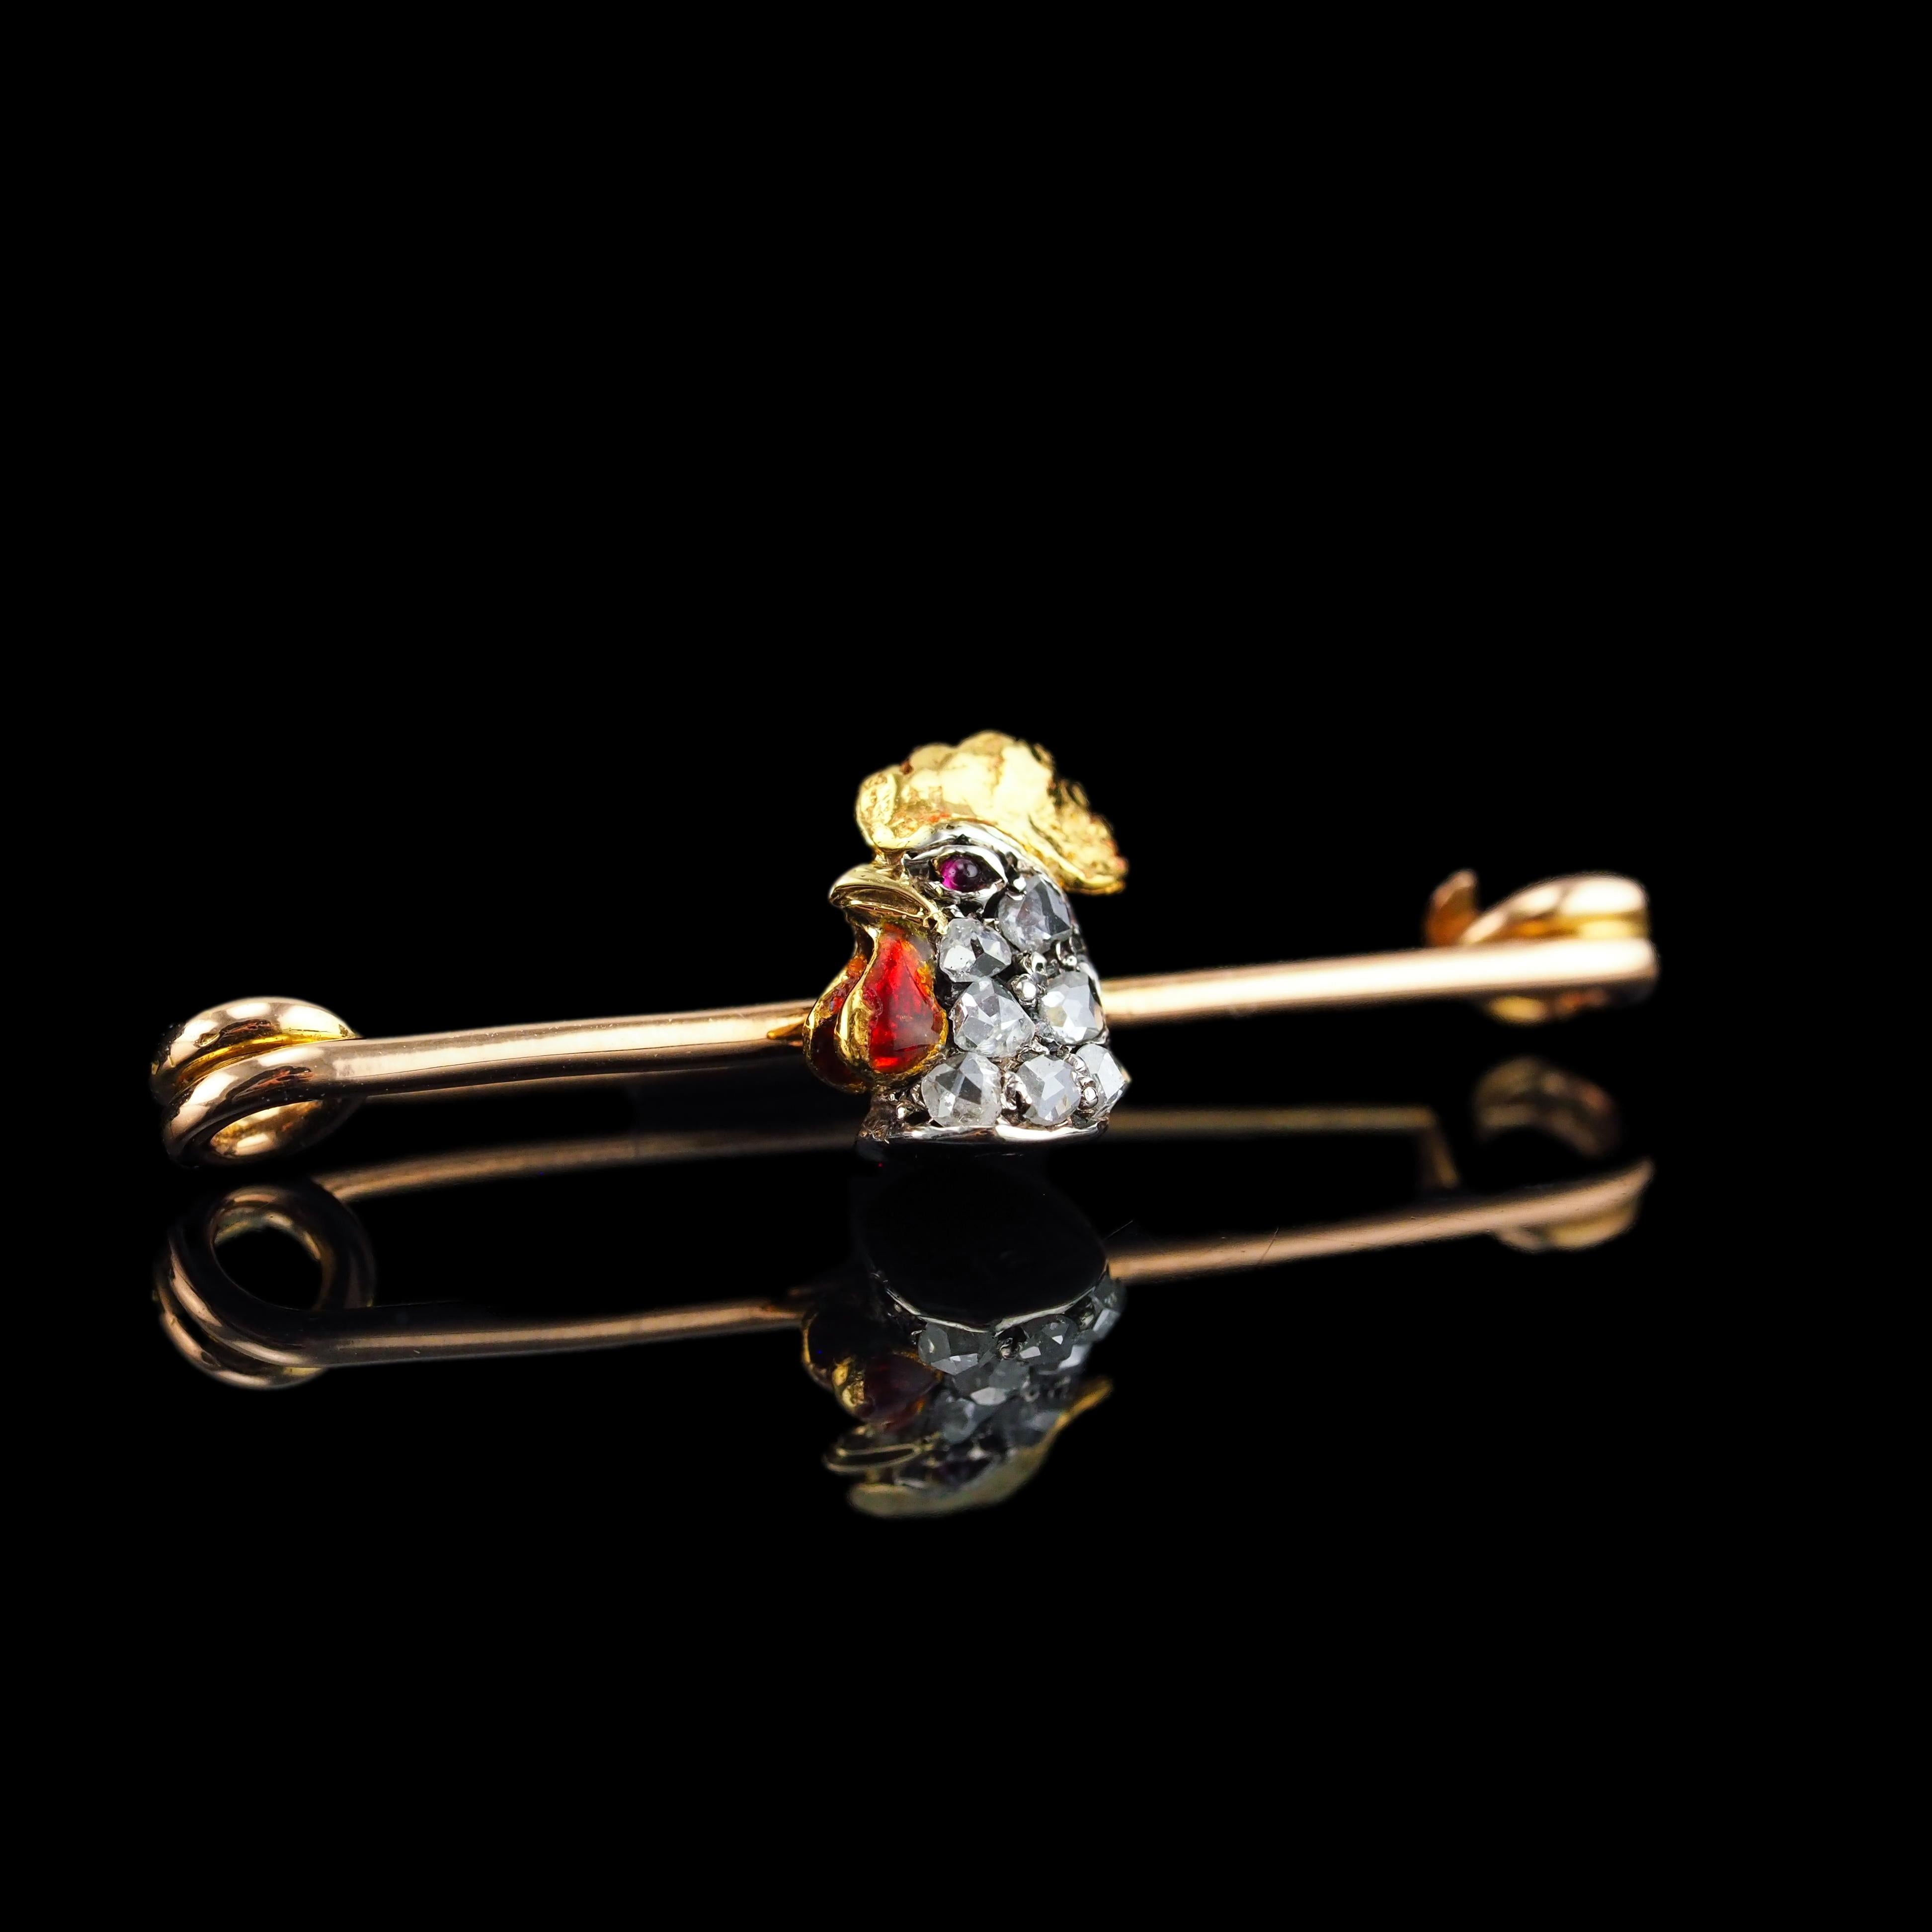 Antique Victorian Diamond and Ruby 15K Gold Cockerel/Rooster/Chicken Brooch Pin For Sale 4